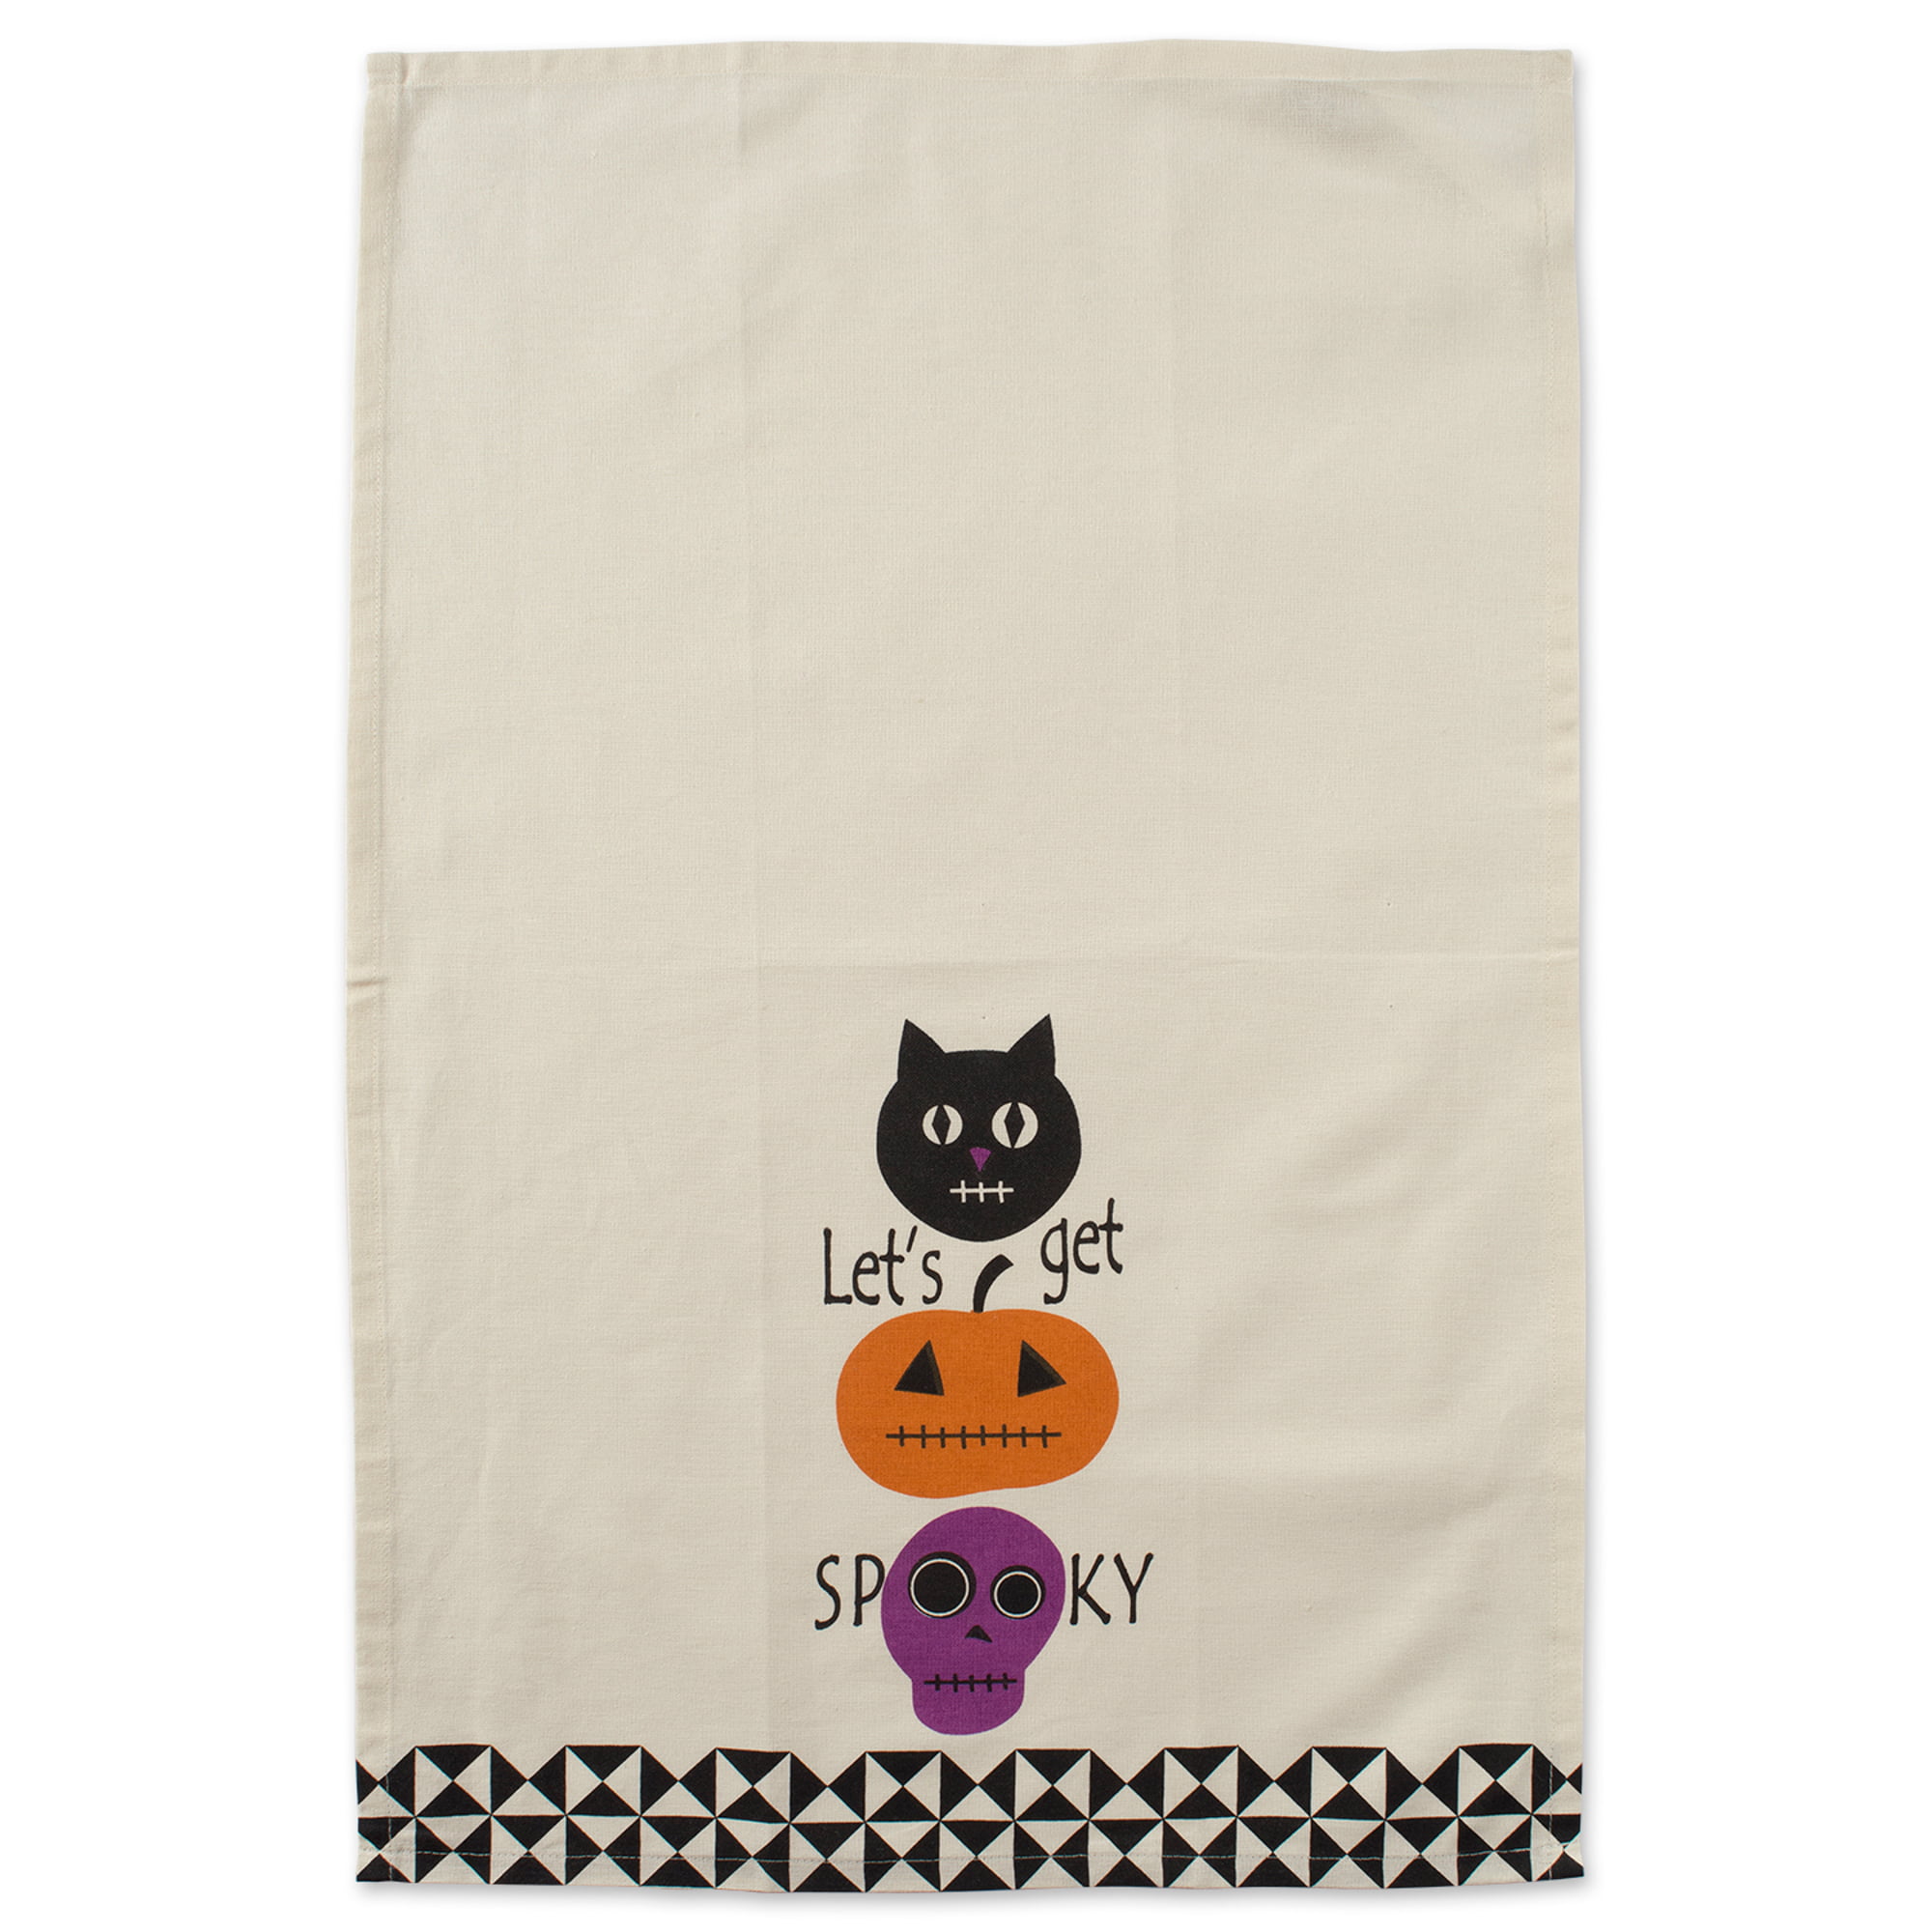 WITCHES & LUCKY BLACK CATS~4 PIECE KITCHEN TOWEL SET~HALLOWEEN SPOOKY~NEW & CUTE 